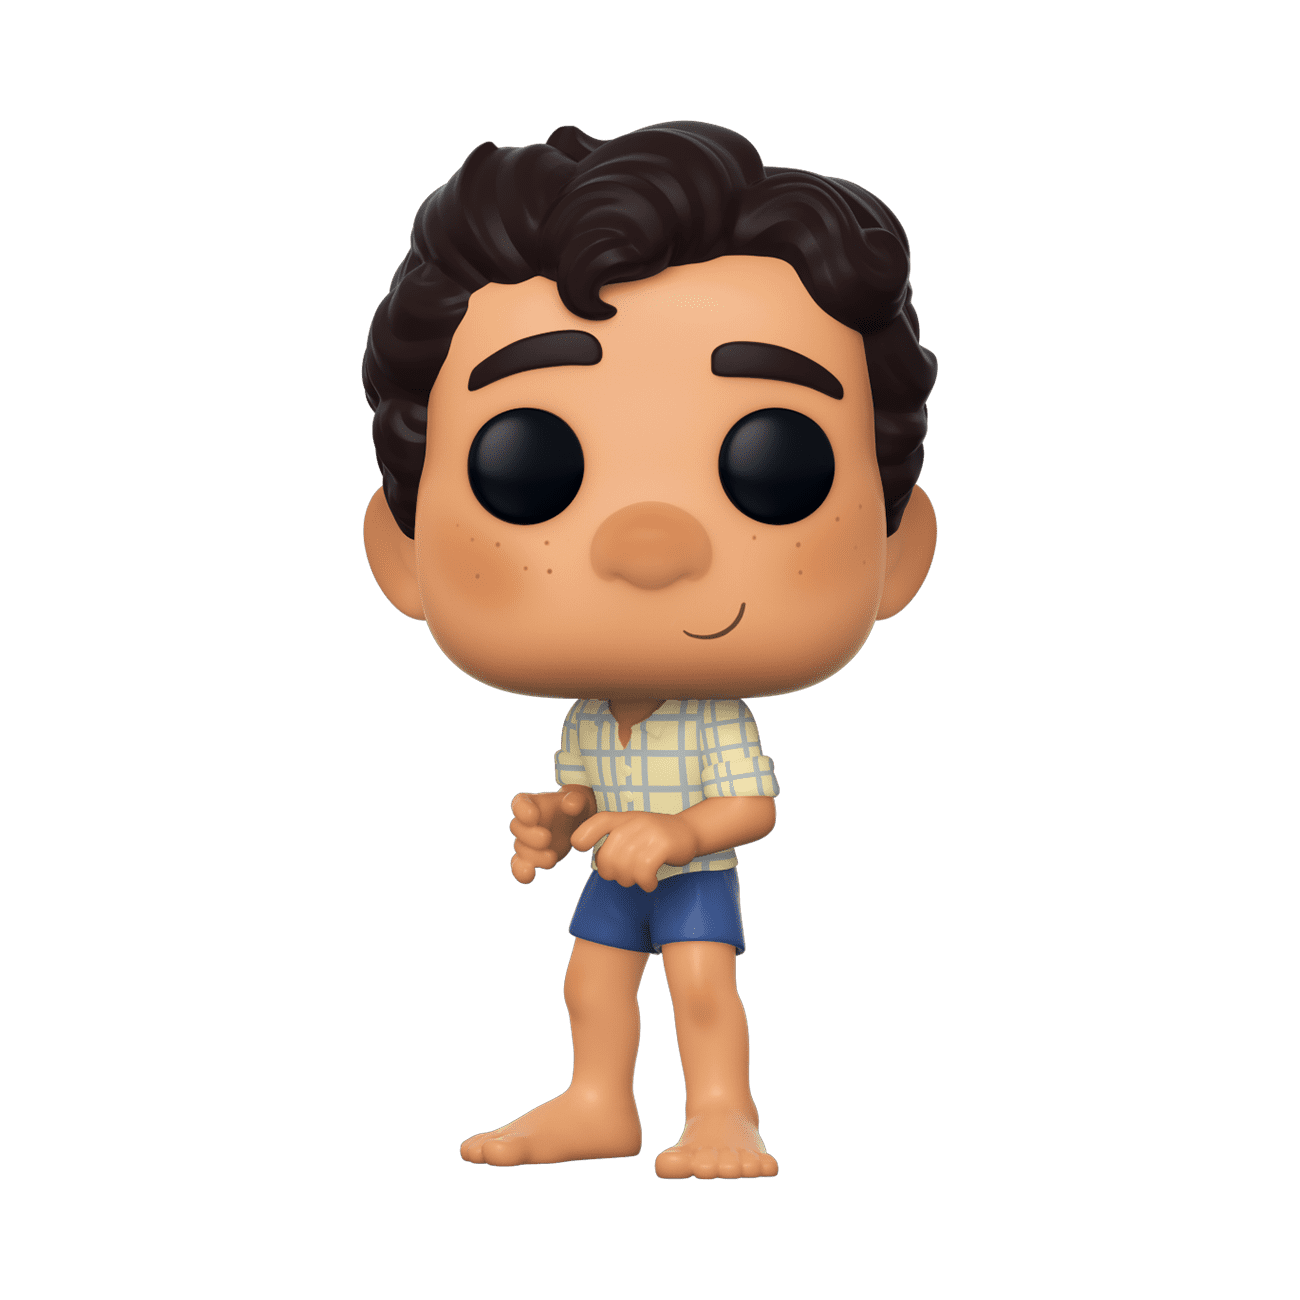 Funko.Pop.Full.Set.Recap' on Instagram: “Funko POP! Disney Pixar' Luca Full  Set Recap' 👉 Dont forget that you can support me if you like my work. Many  thanks …